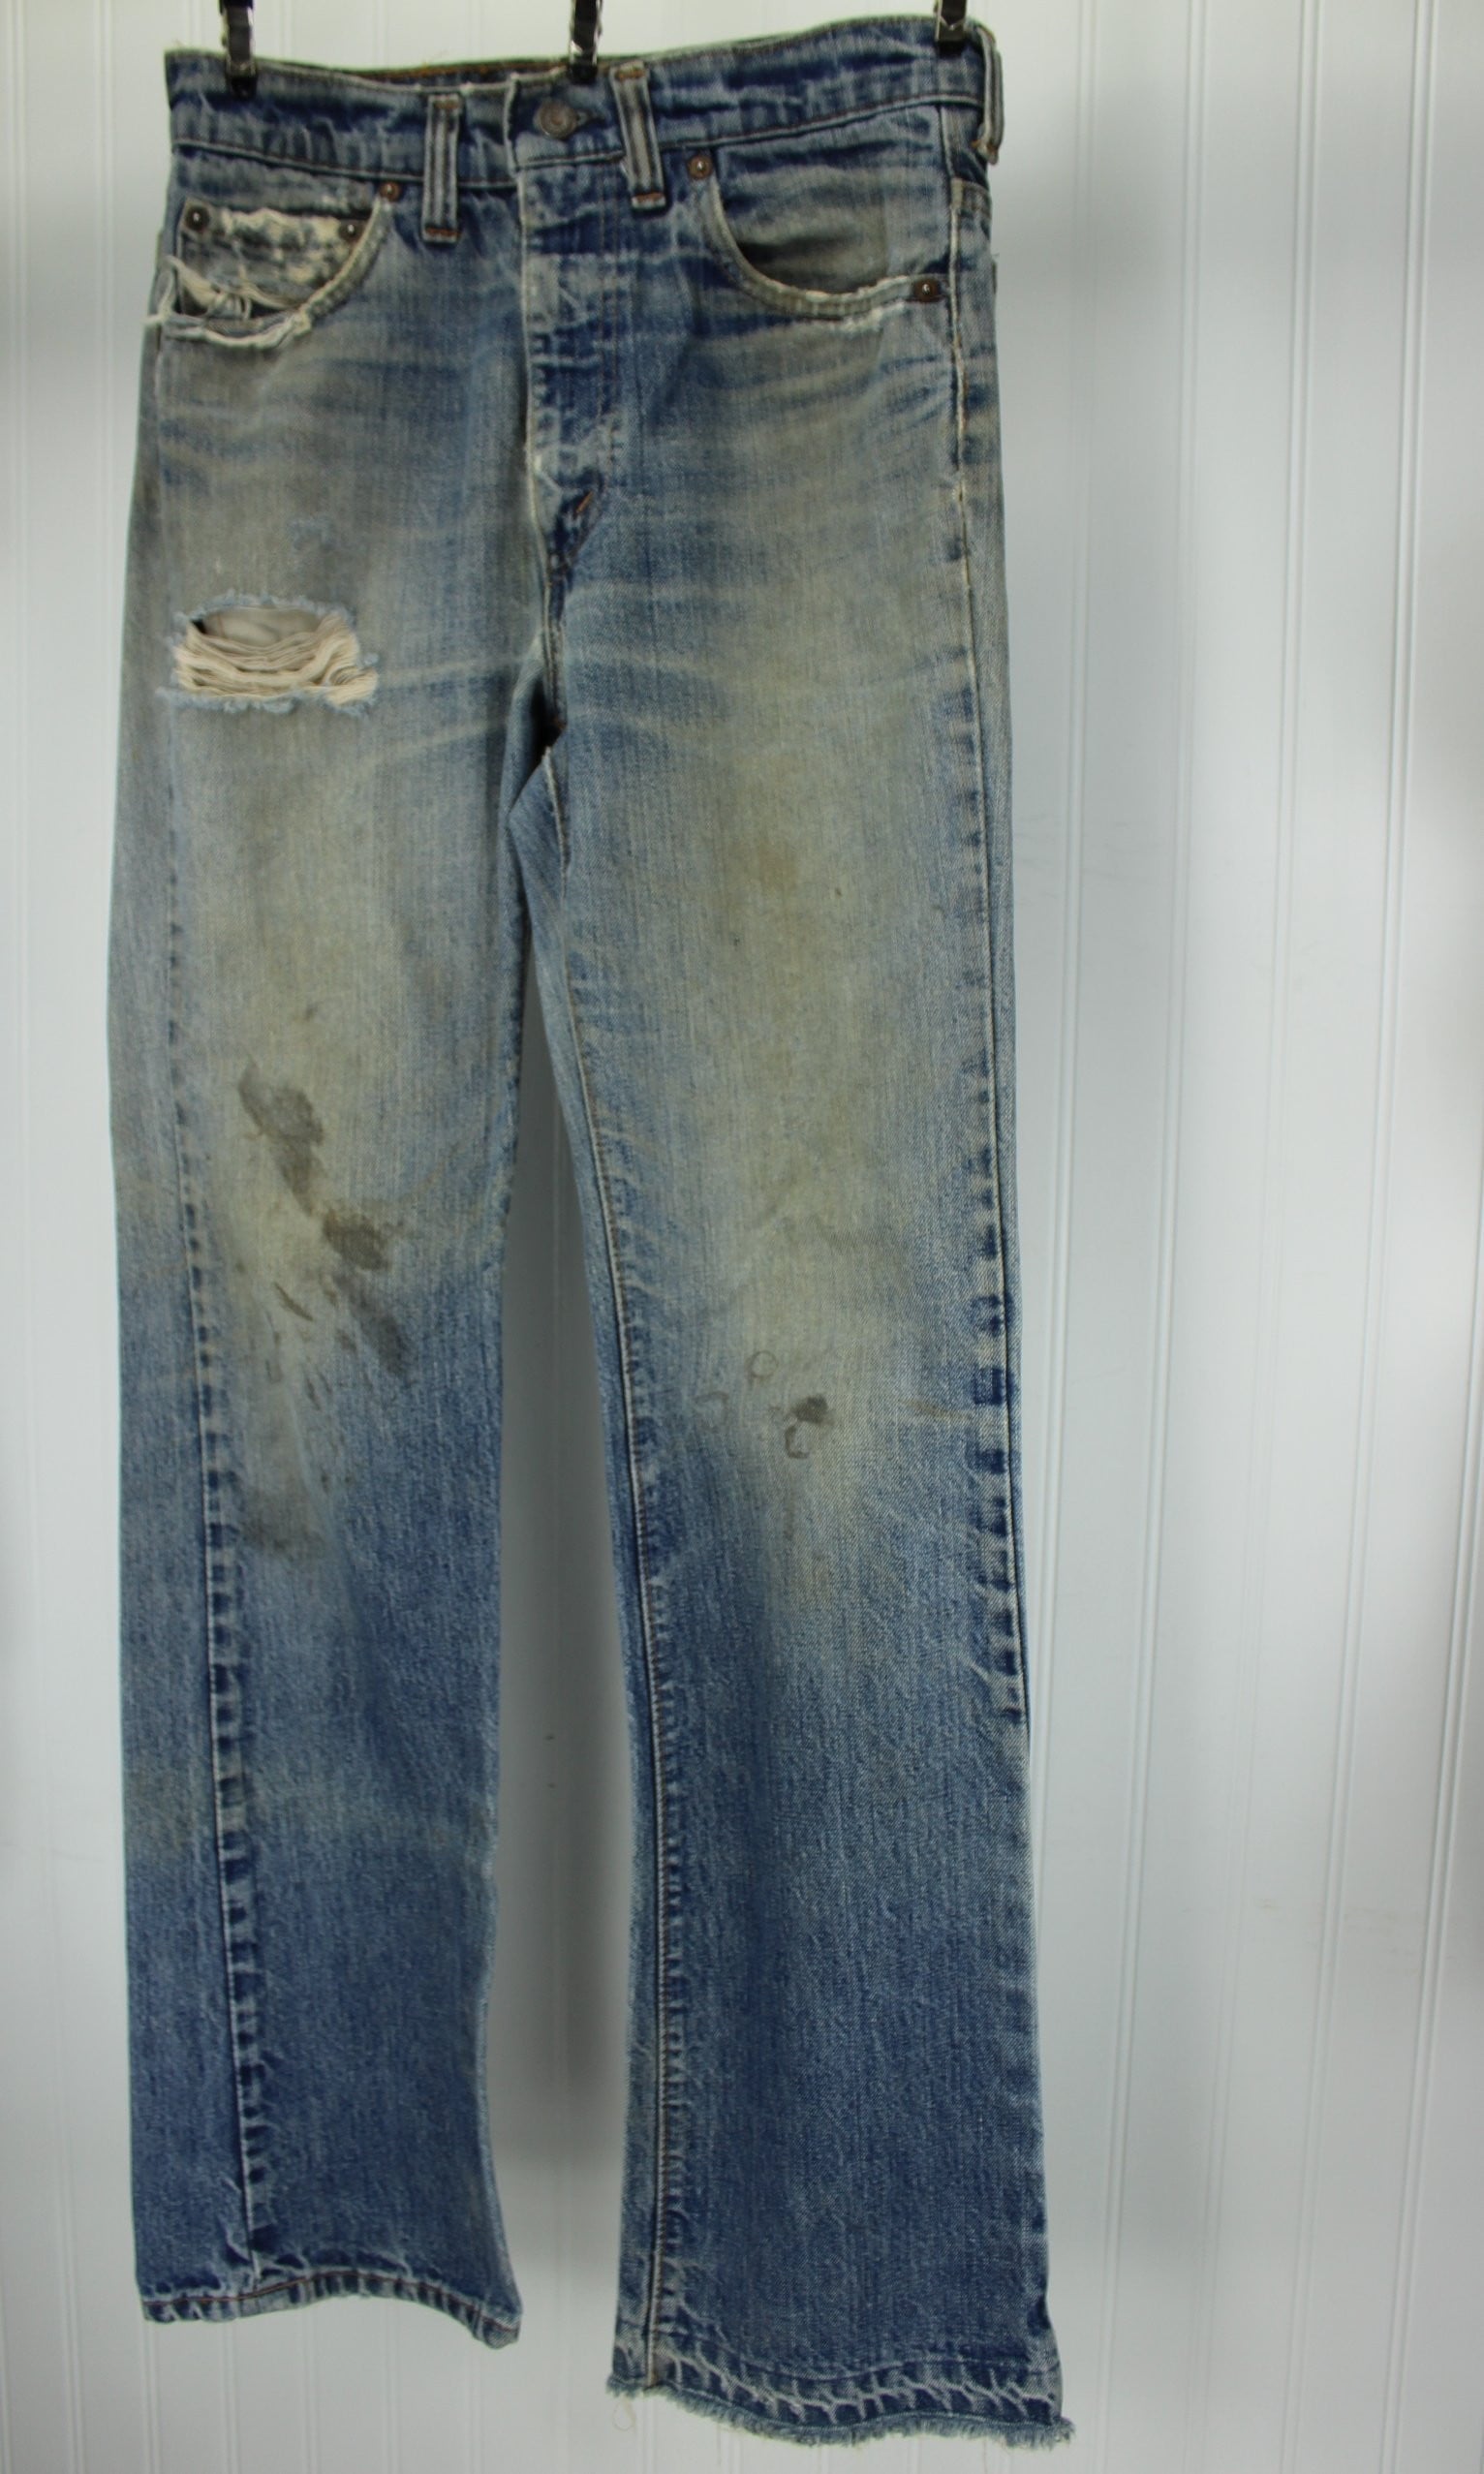 Vintage Levi's Skate Boarder Distressed Grunge  Jeans - Early 1990s - Waist 29" Red Tab